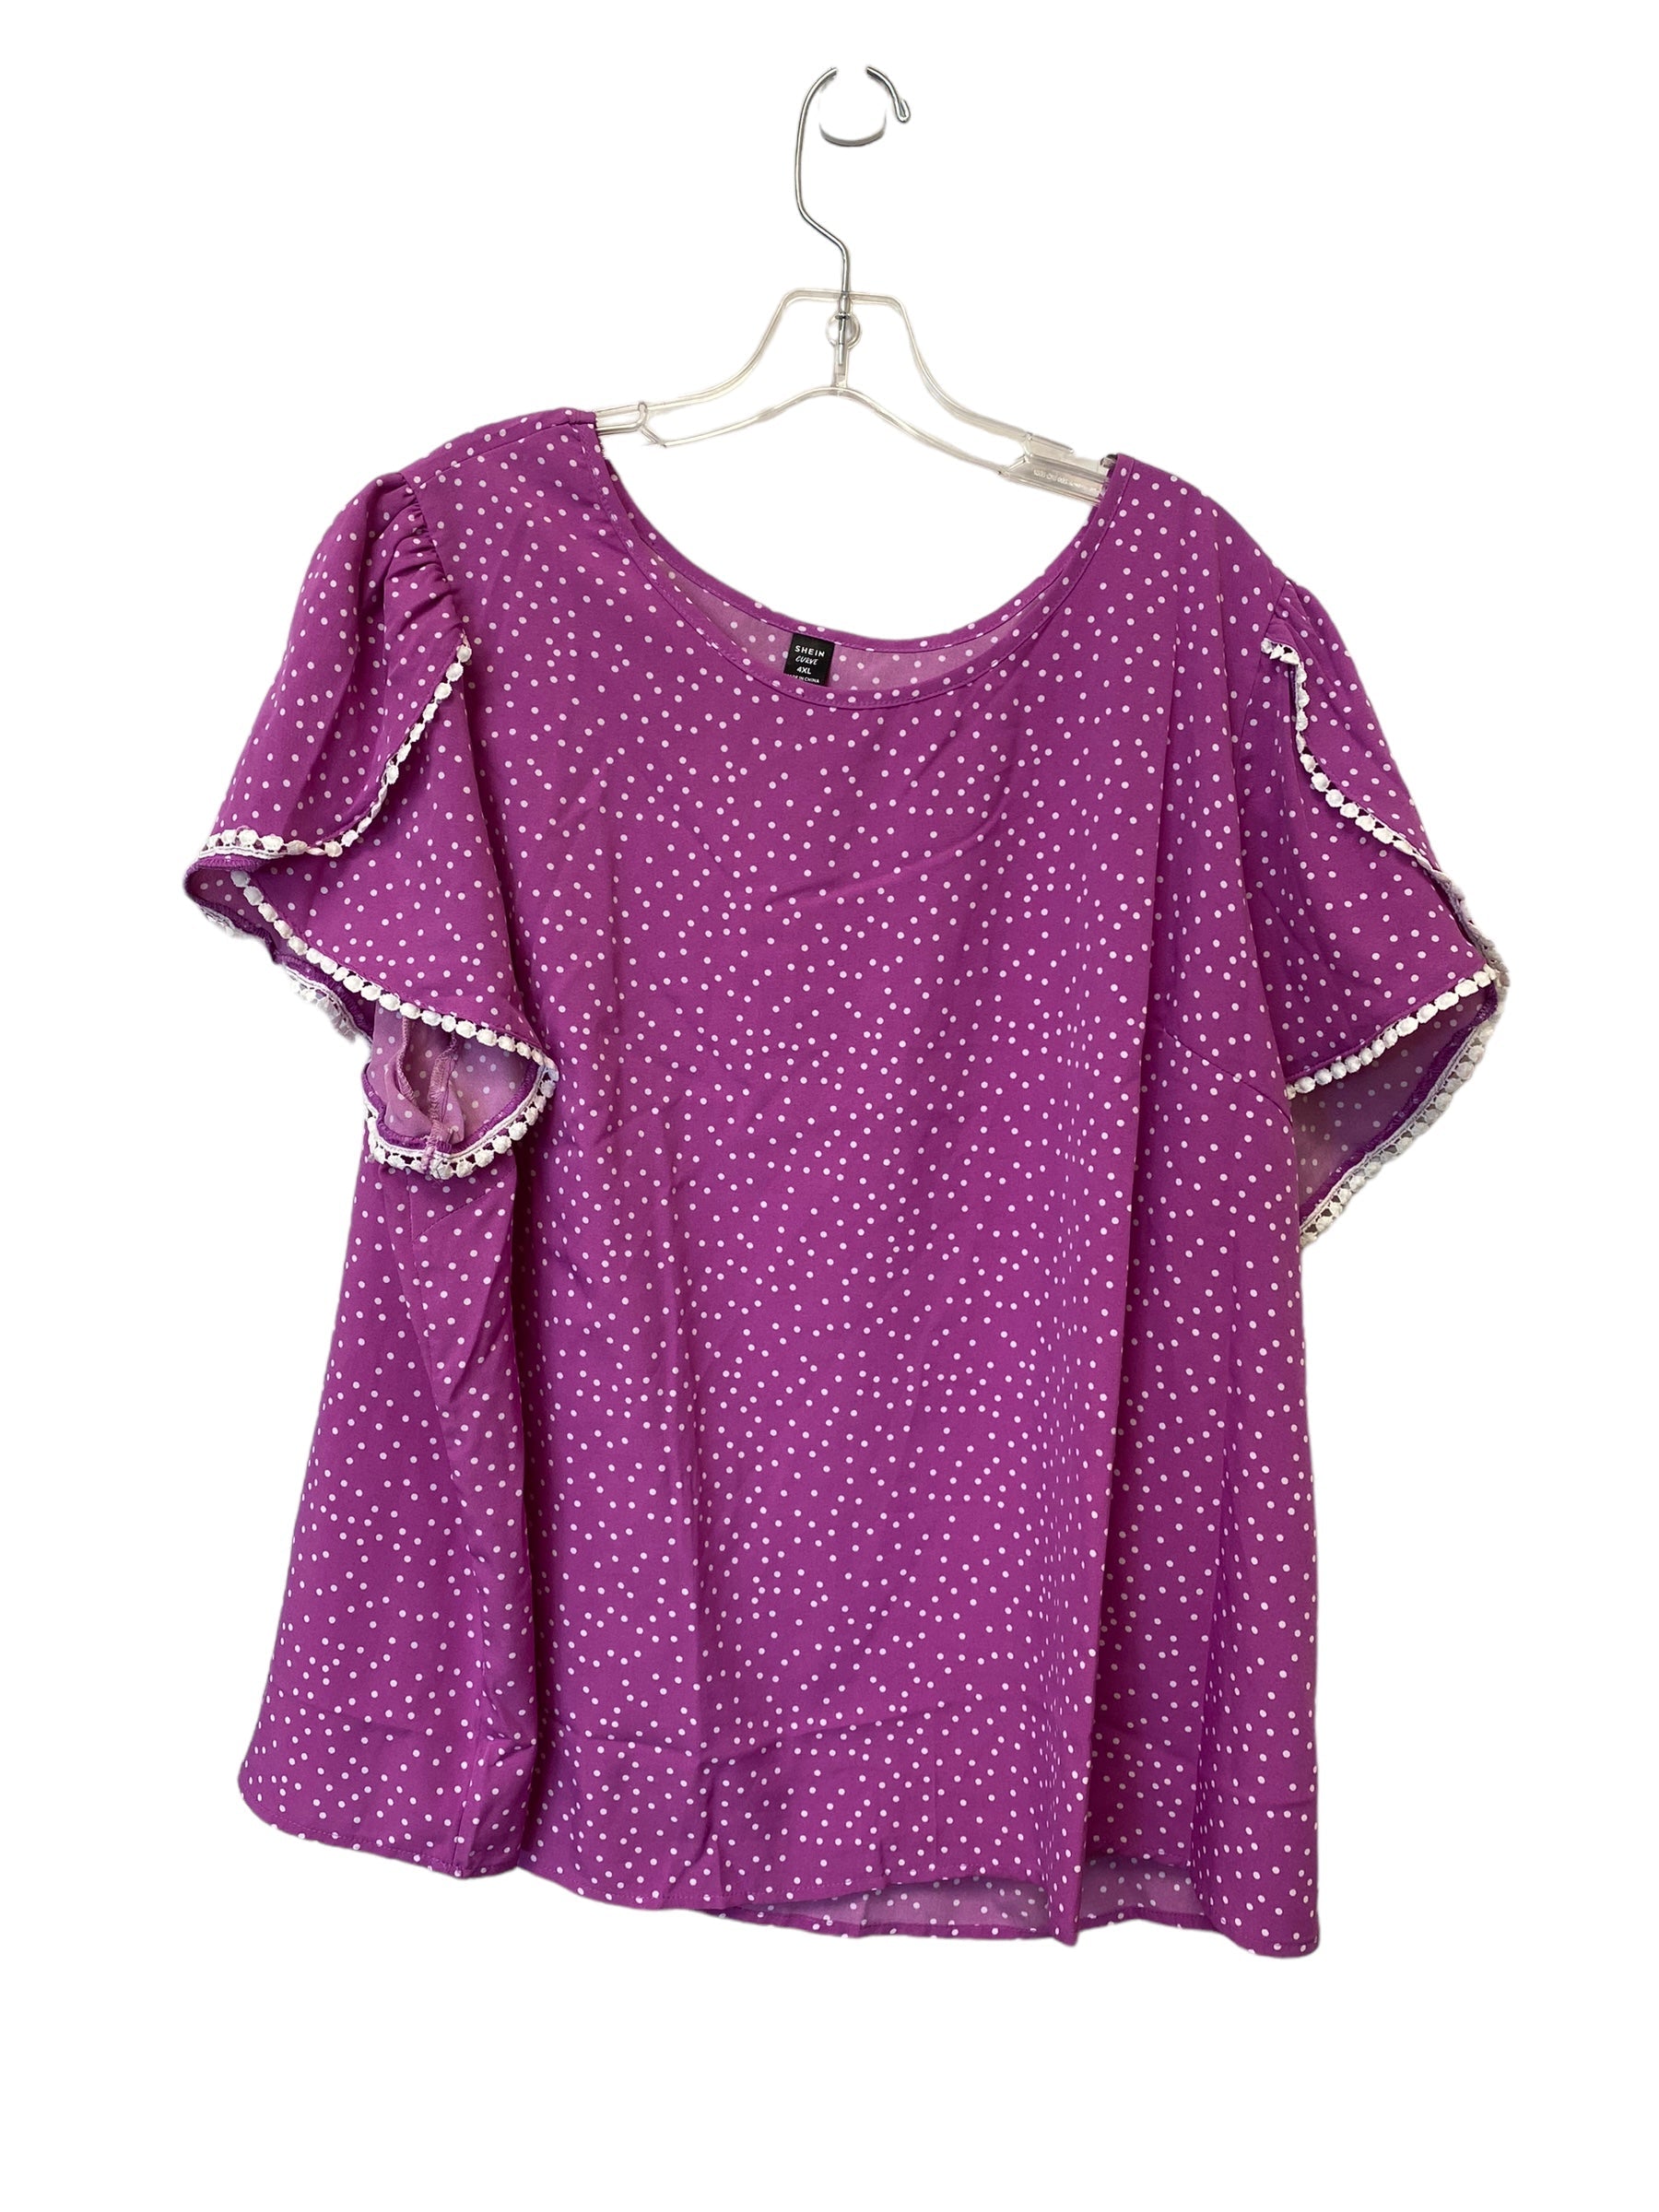 Top Short Sleeve By Shein Size: 4x